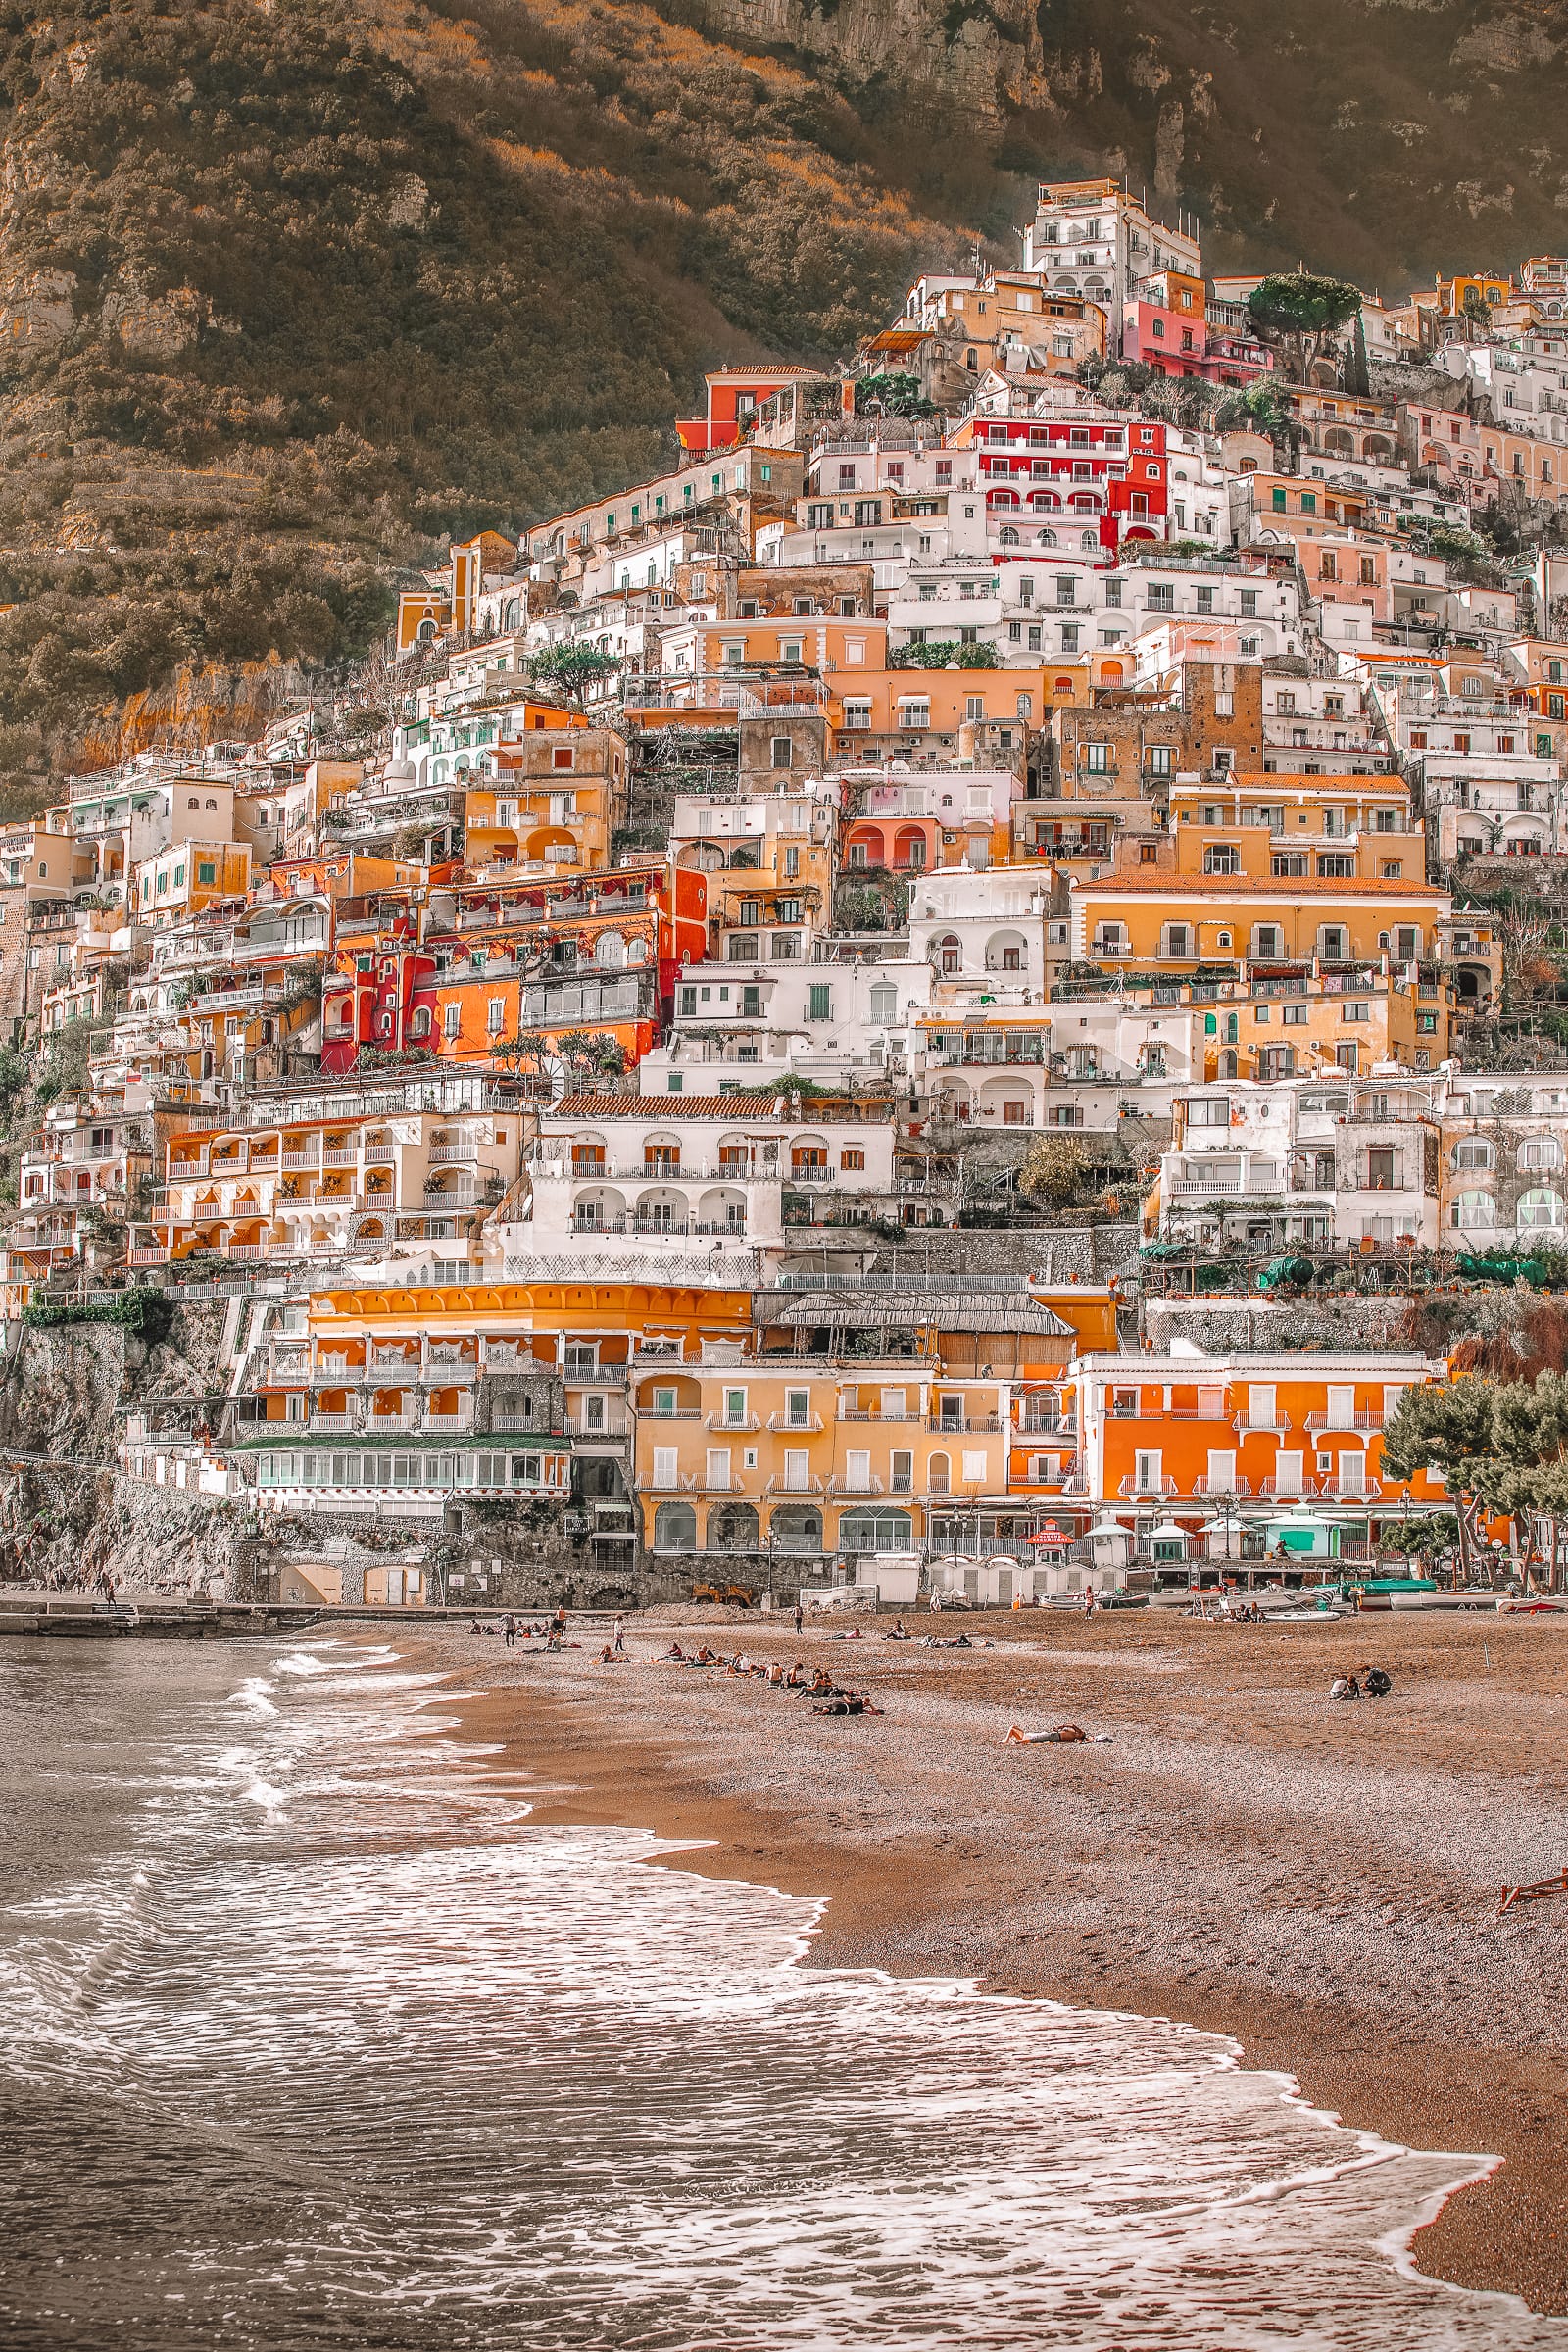 7 Reasons To Visit Positano, Italy - Hand Luggage Only - Travel